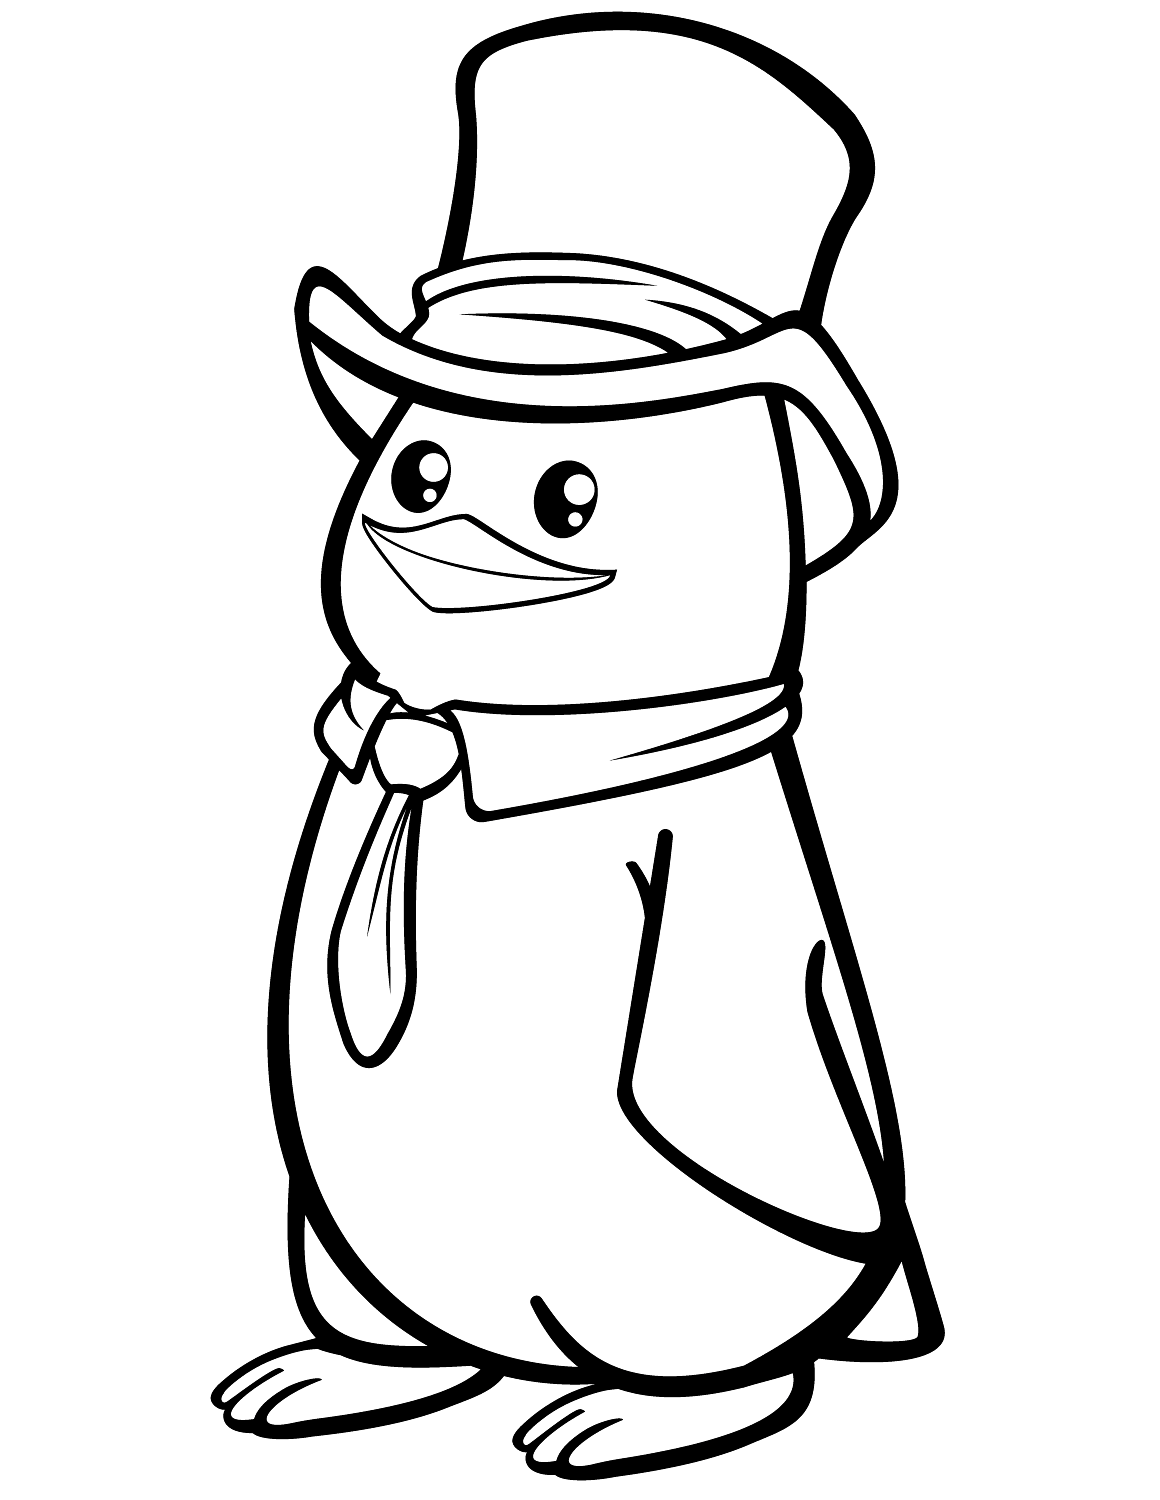 Polar Penguin With A Top Hat